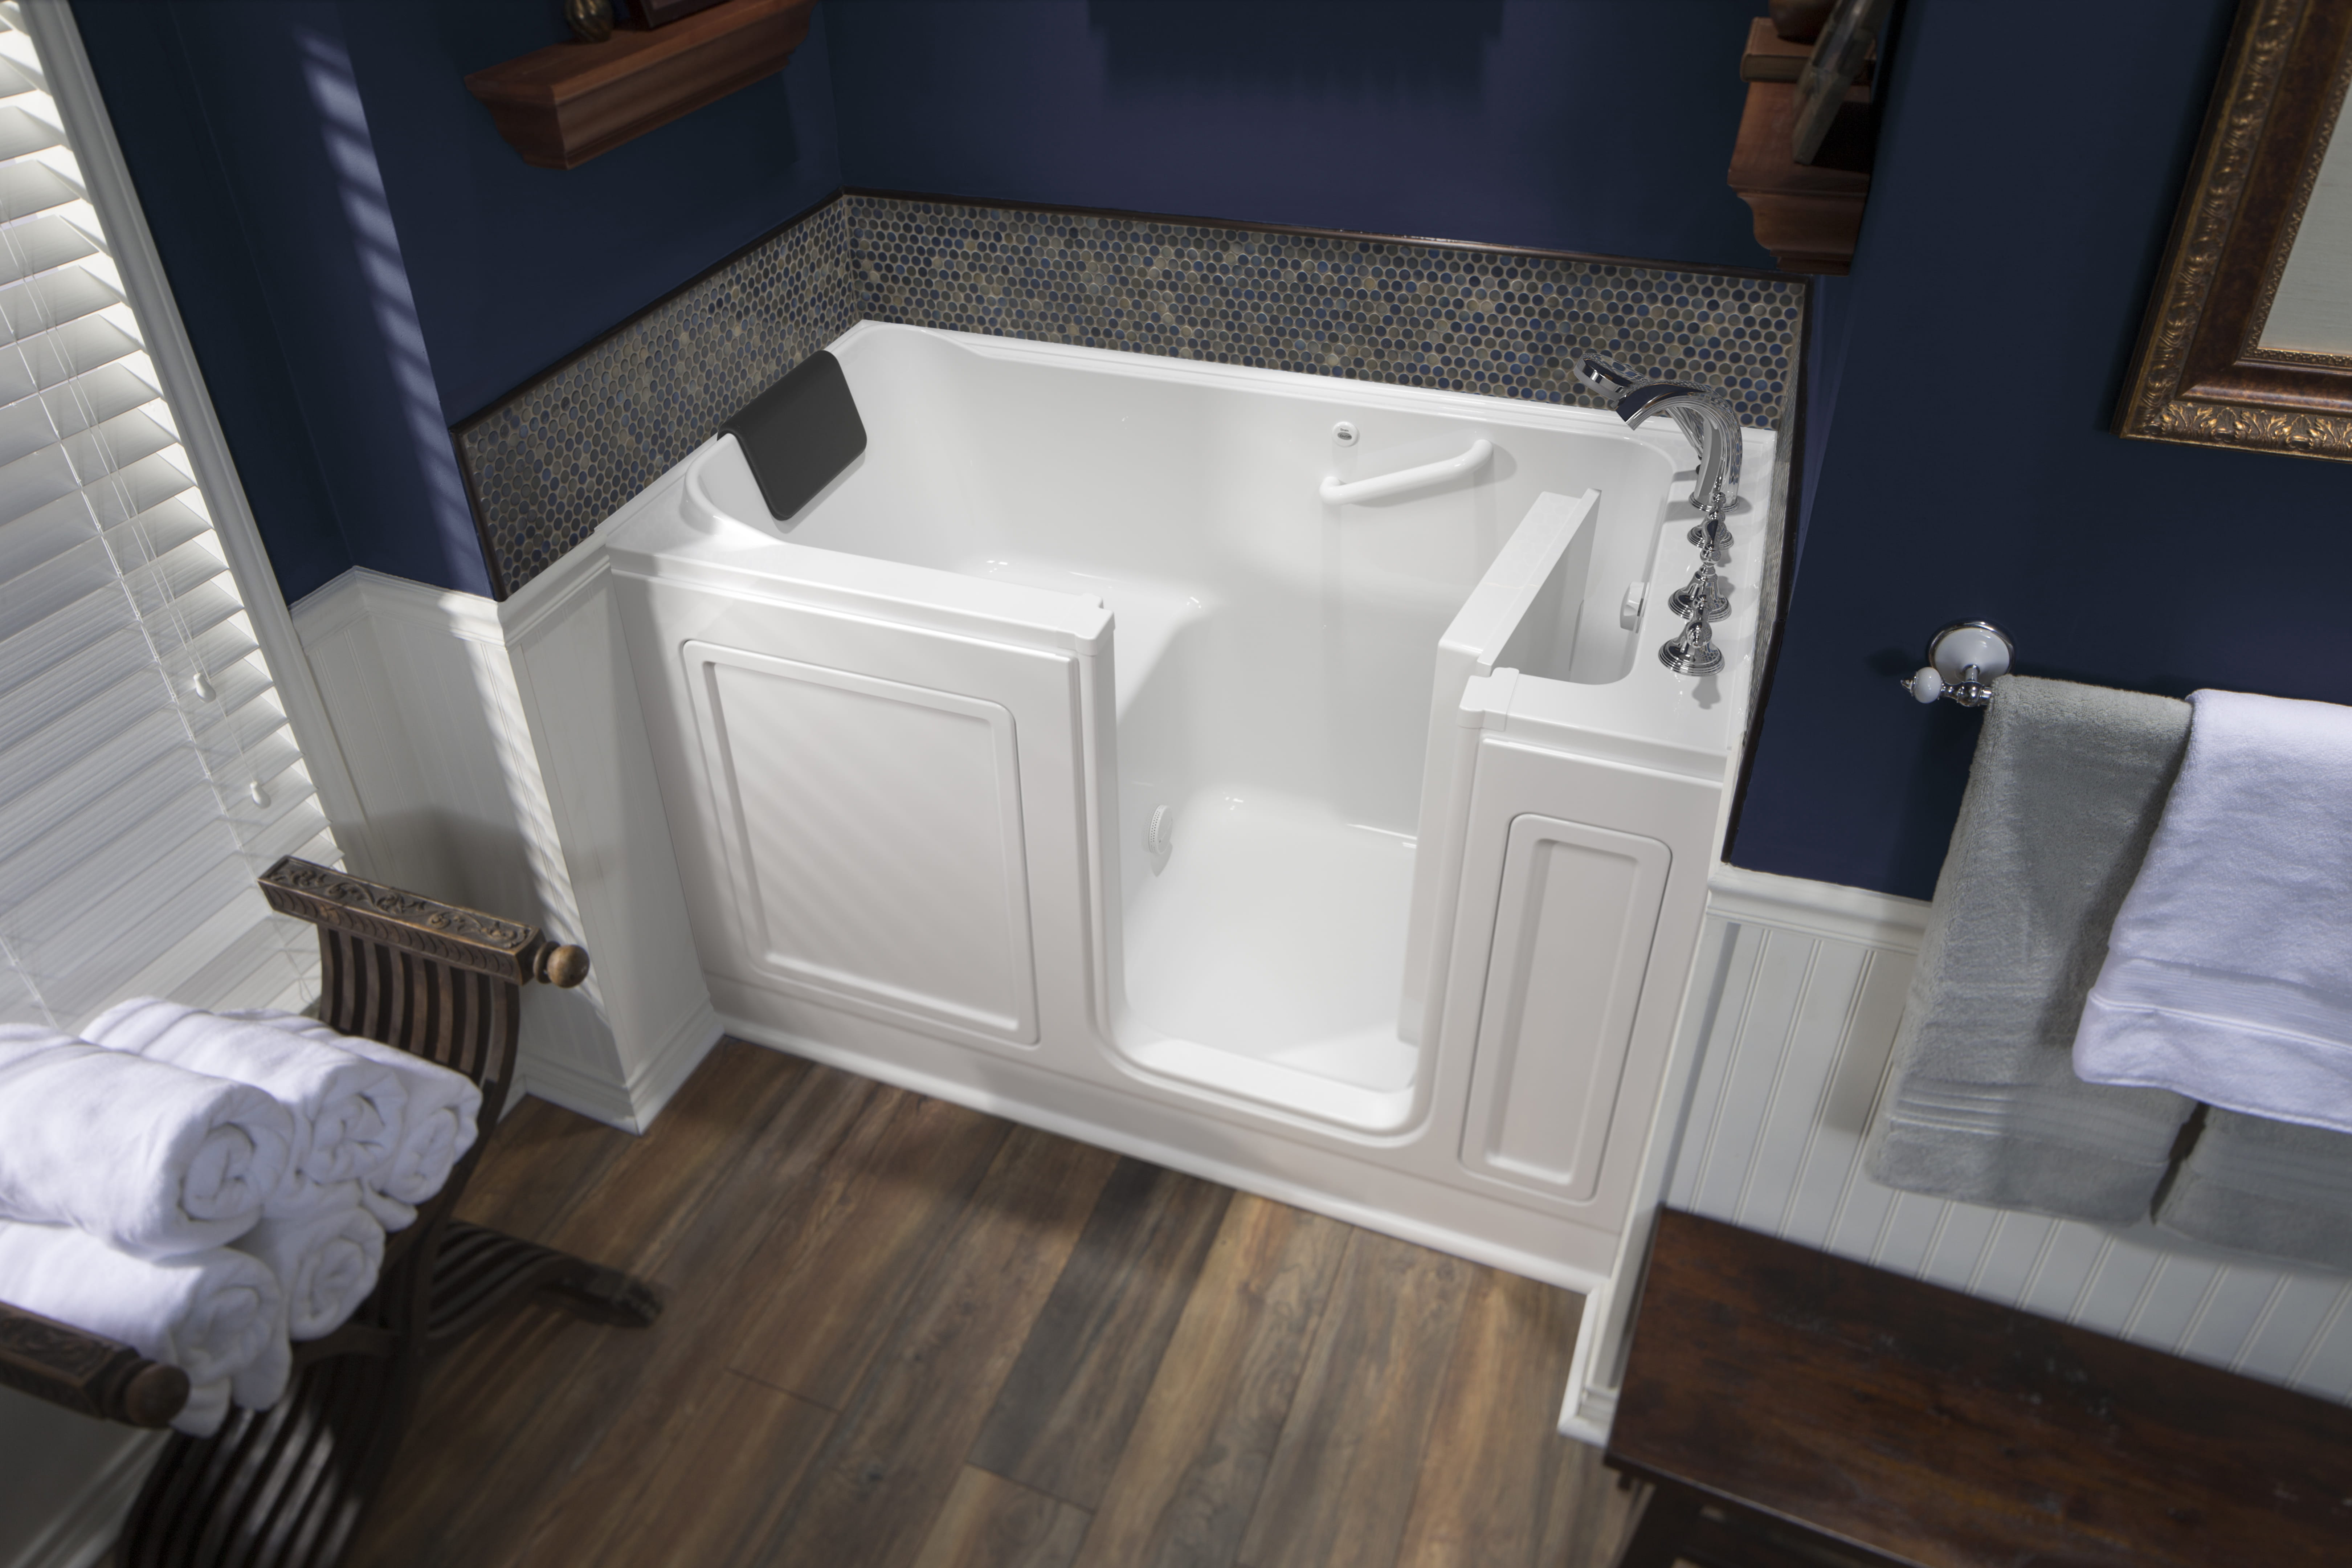 Acrylic Luxury Series 32 x 60 -Inch Walk-in Tub With Soaker System - Right-Hand Drain With Faucet